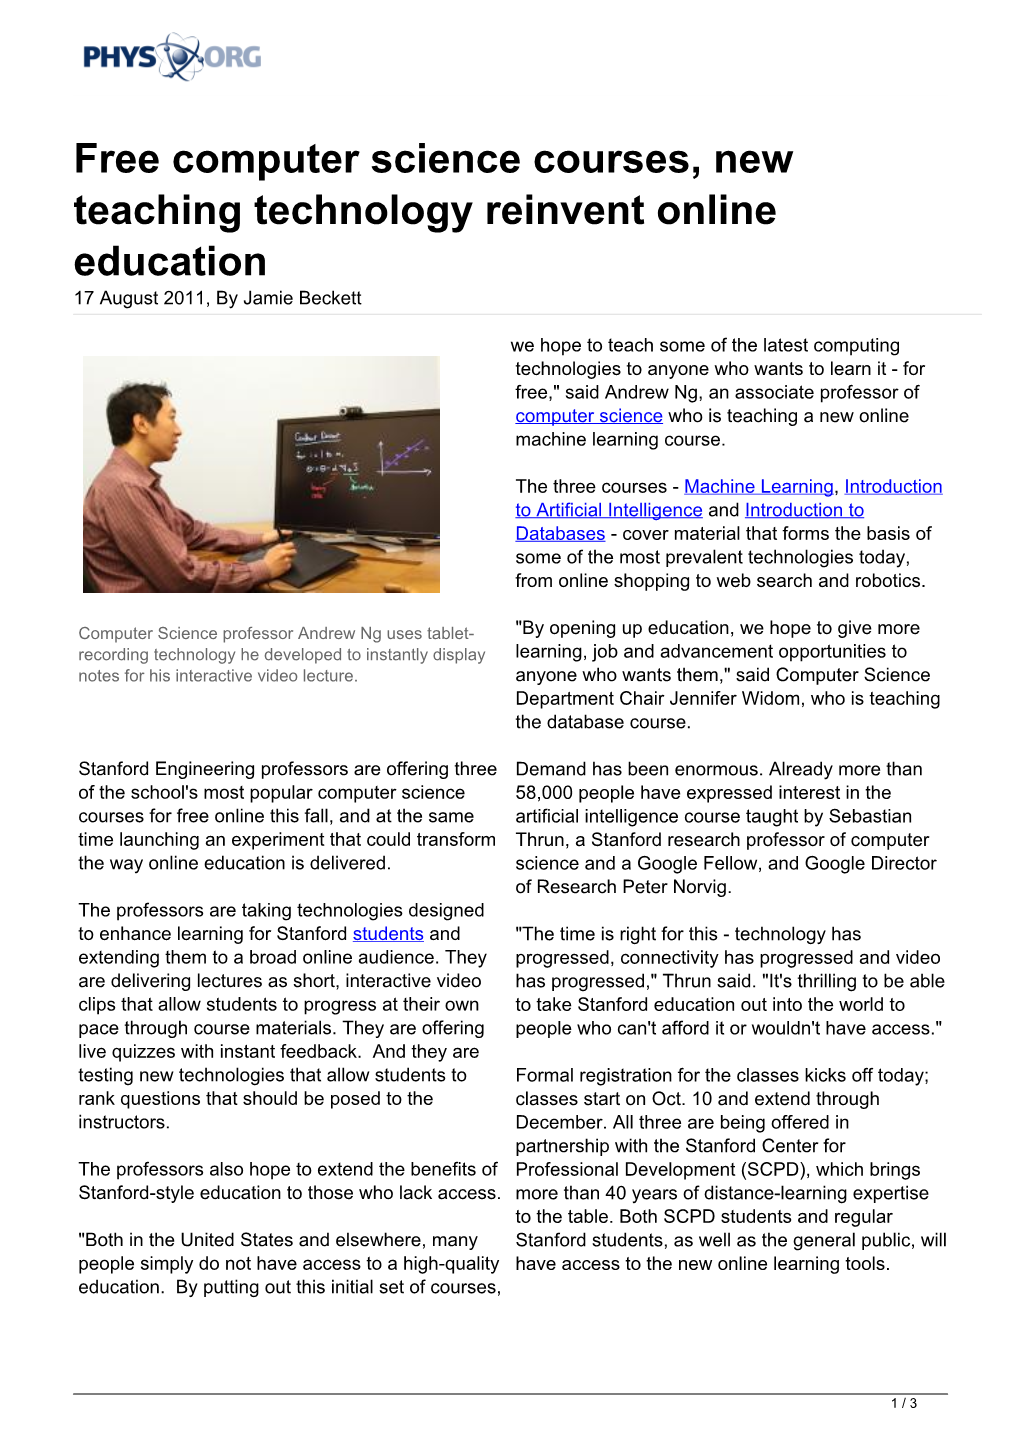 Free Computer Science Courses, New Teaching Technology Reinvent Online Education 17 August 2011, by Jamie Beckett